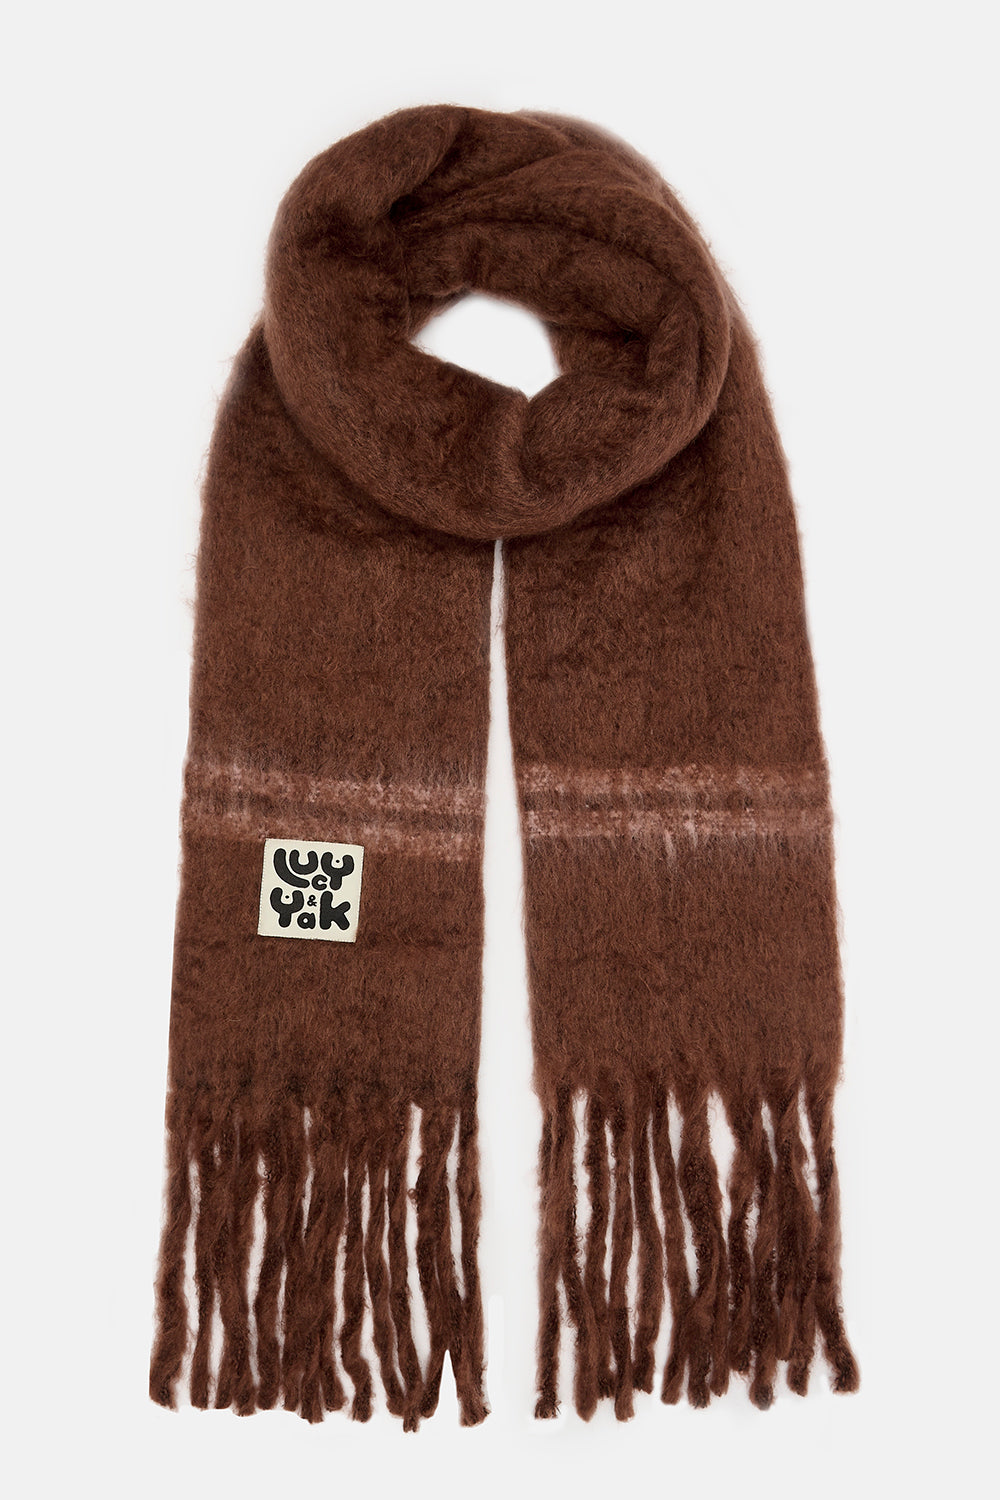 Rowan Scarf: RECYCLED POLYESTER - Brown with Pink Stripe – Lucy & Yak